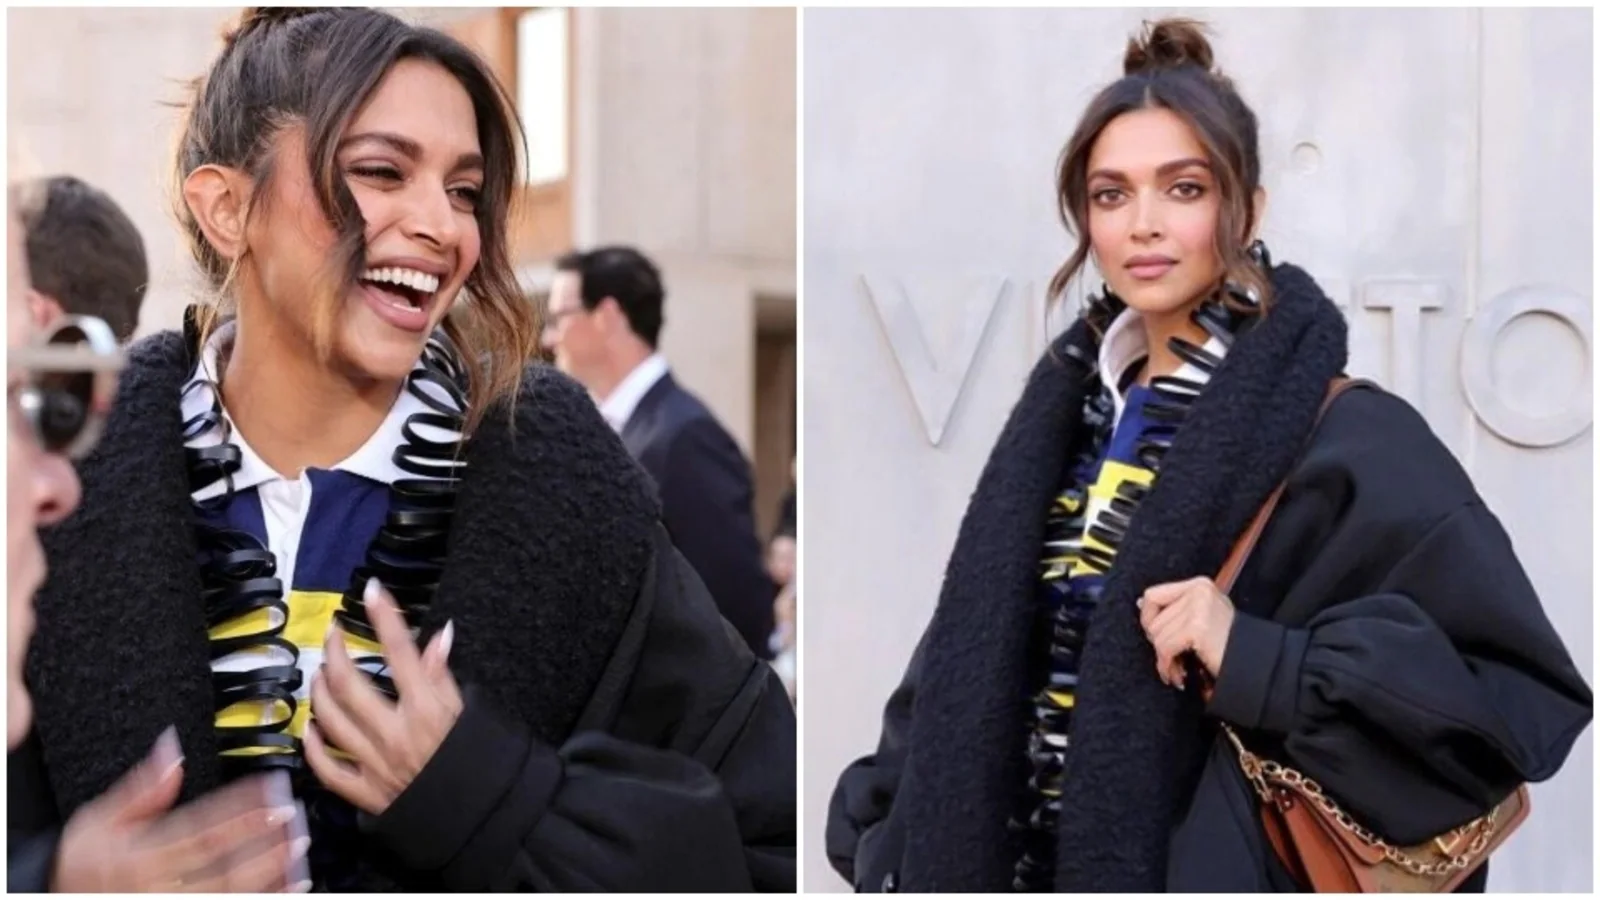 Deepika Padukone at Louis Vuitton Show makes first appearance as house ambassador in oversized outfit and glam boots